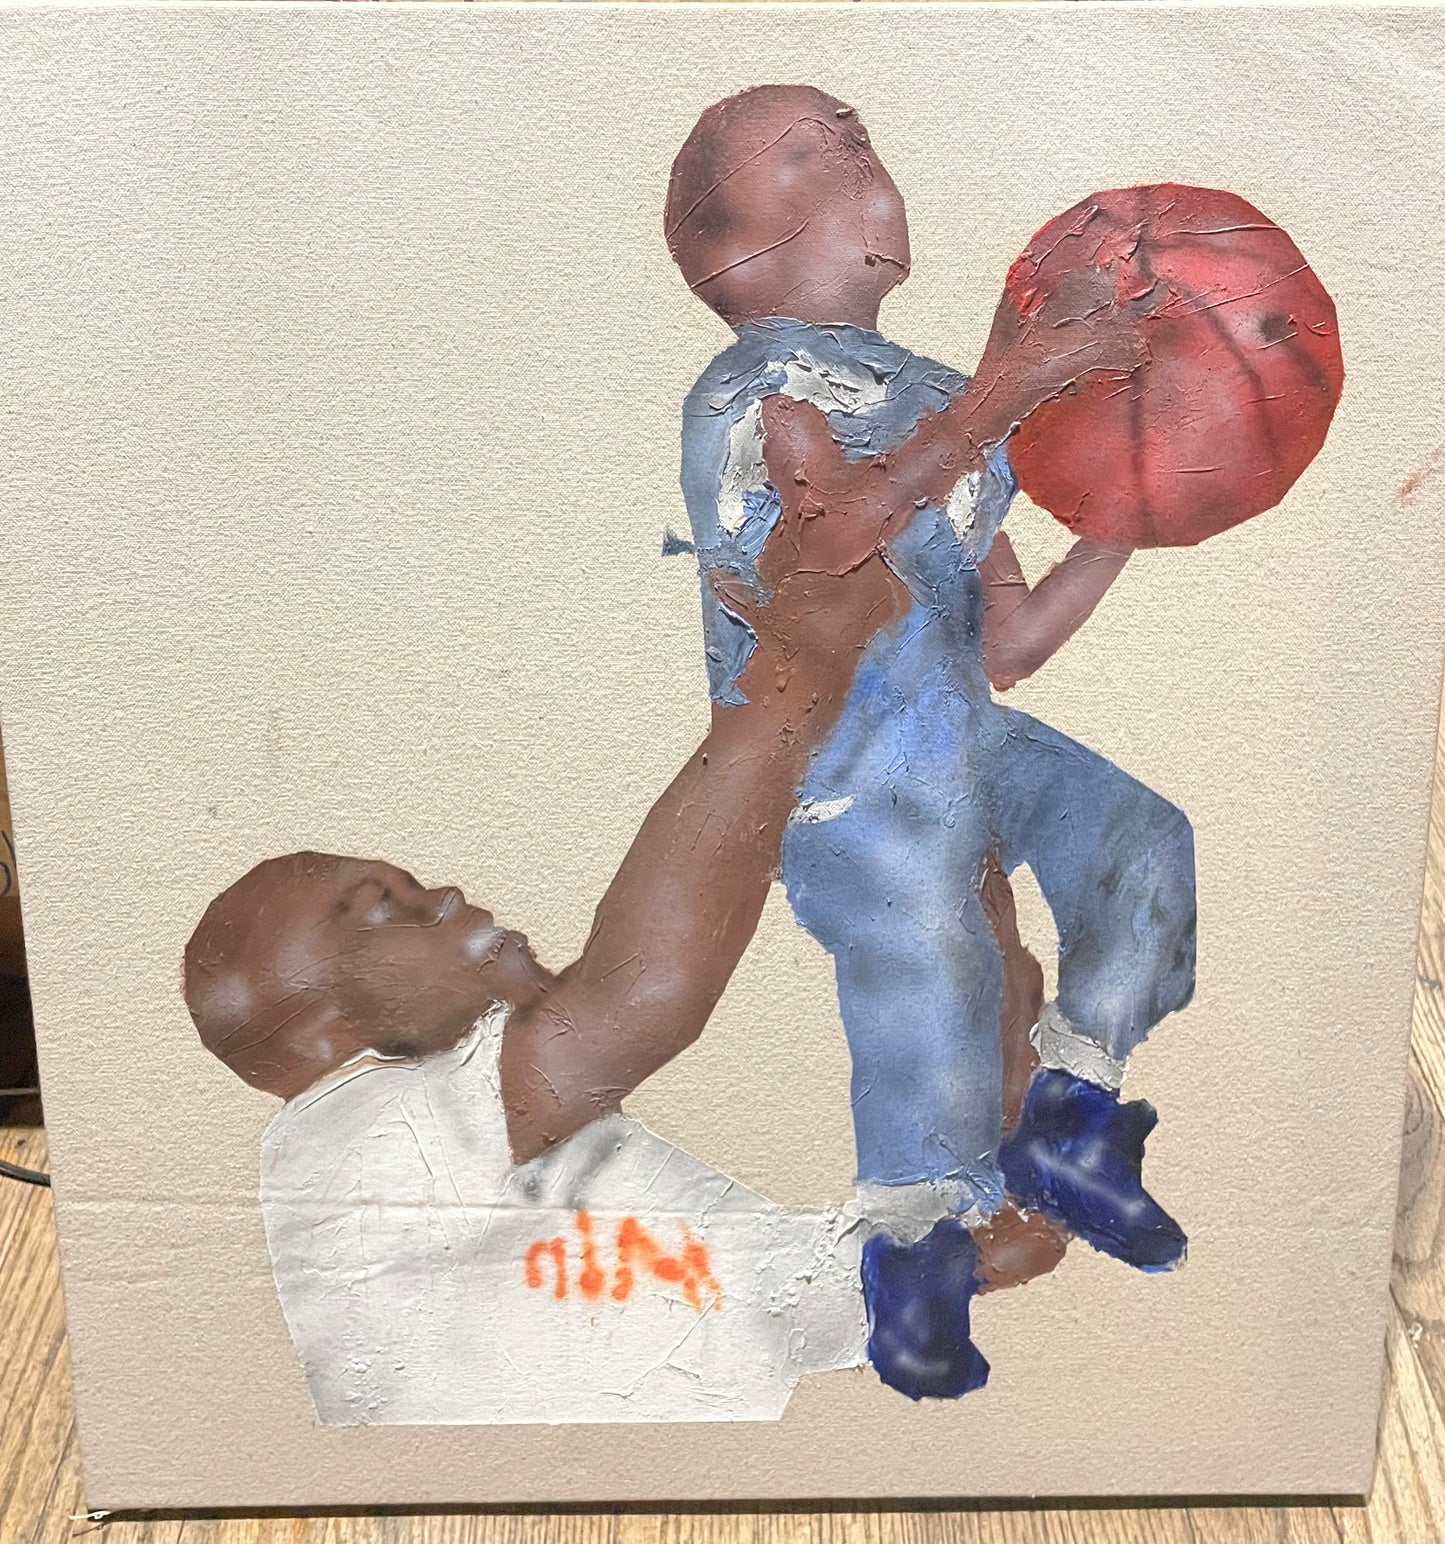 Basketball by Gabe Rozzell